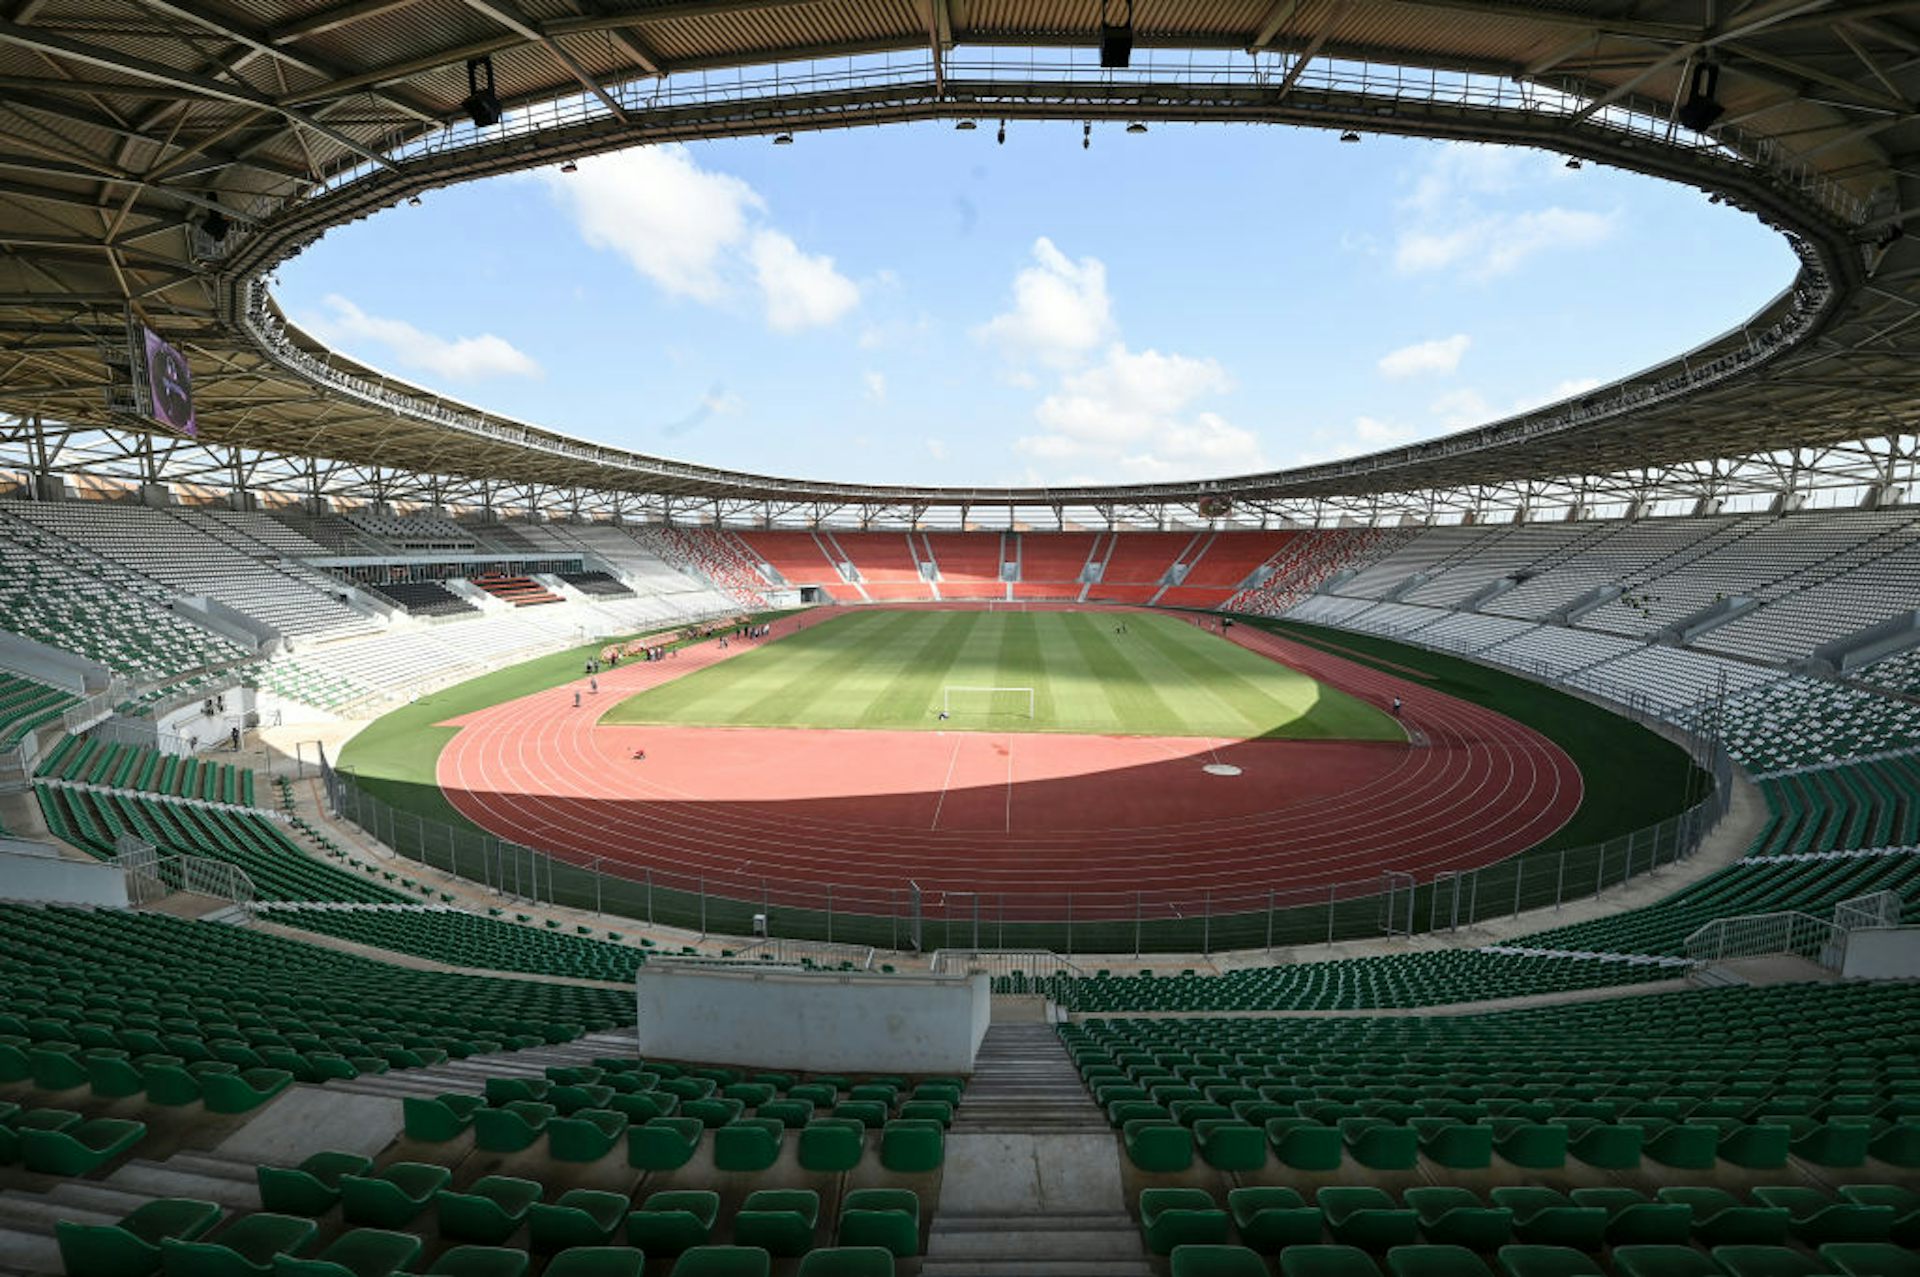 Afcon: everything you need to know about a record year for Africa’s biggest football event